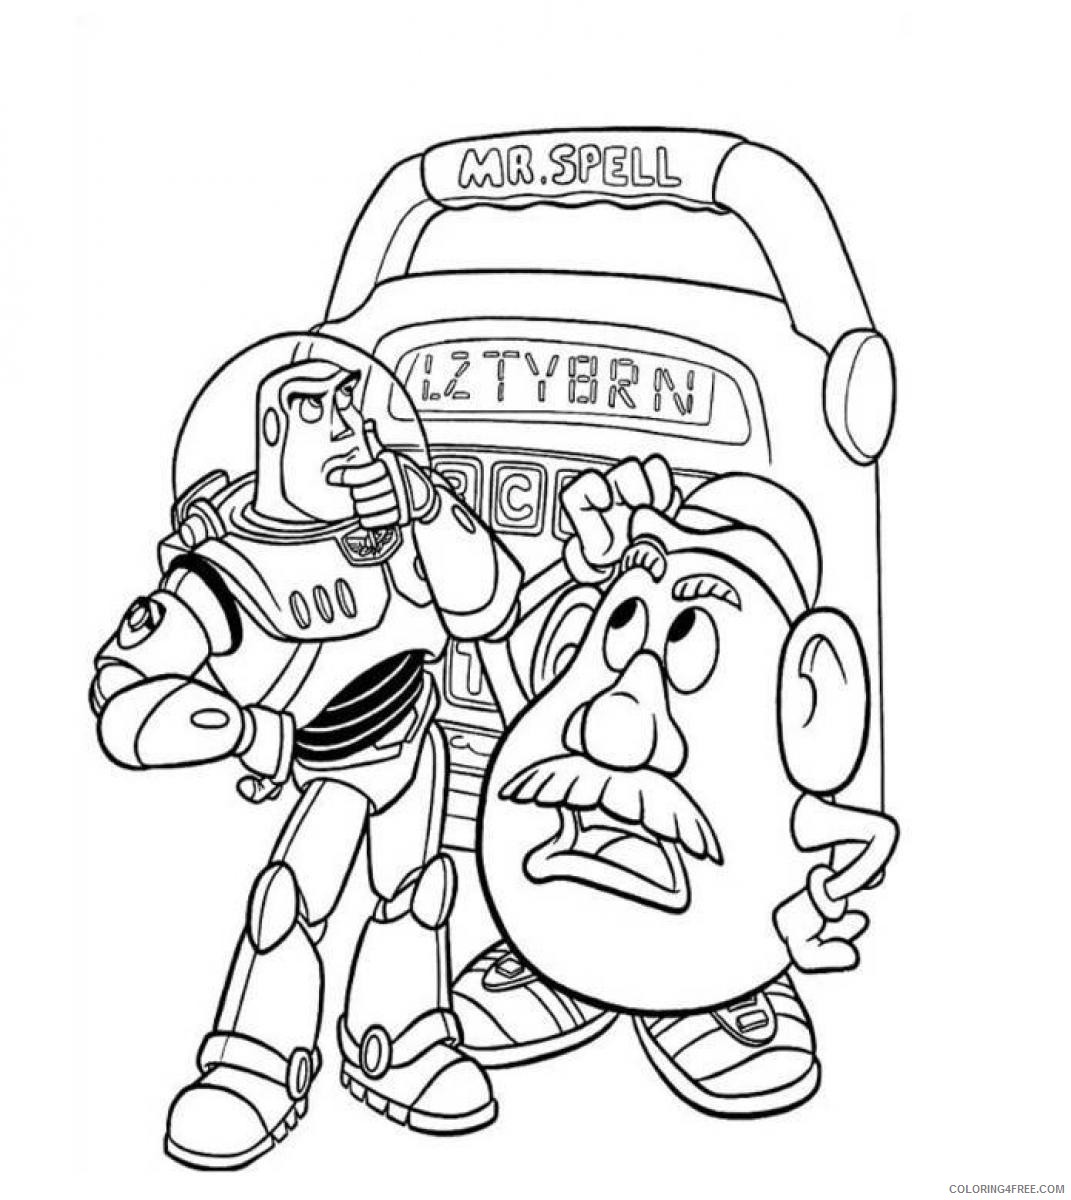 buzz lightyear coloring pages with mr potato head Coloring4free